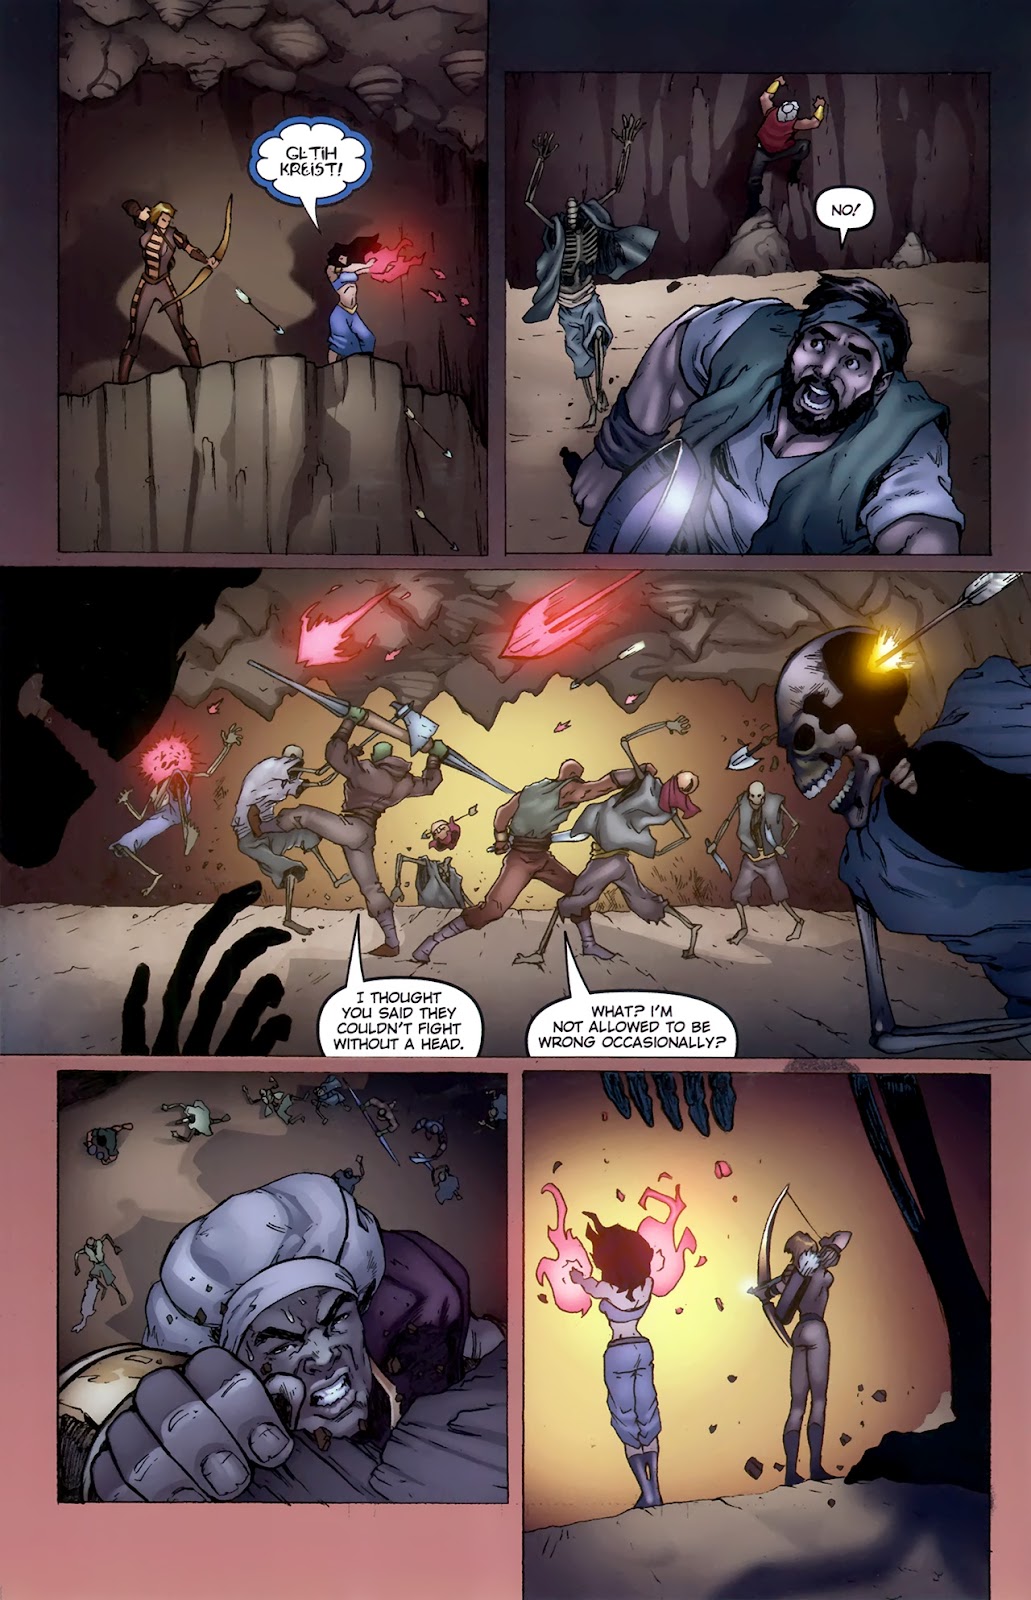 1001 Arabian Nights: The Adventures of Sinbad issue 11 - Page 14